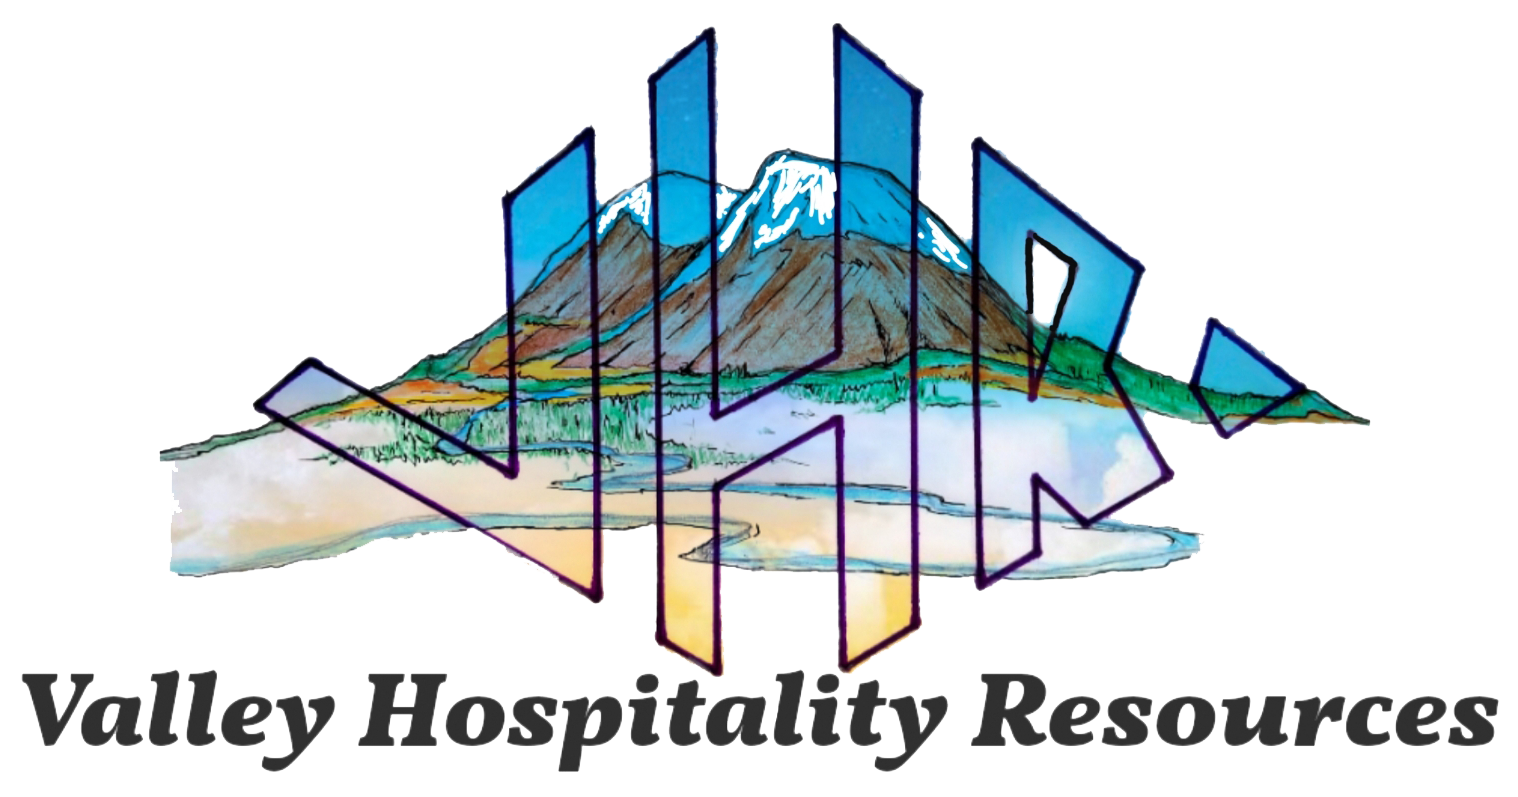 Valley Hospitality Resources logo